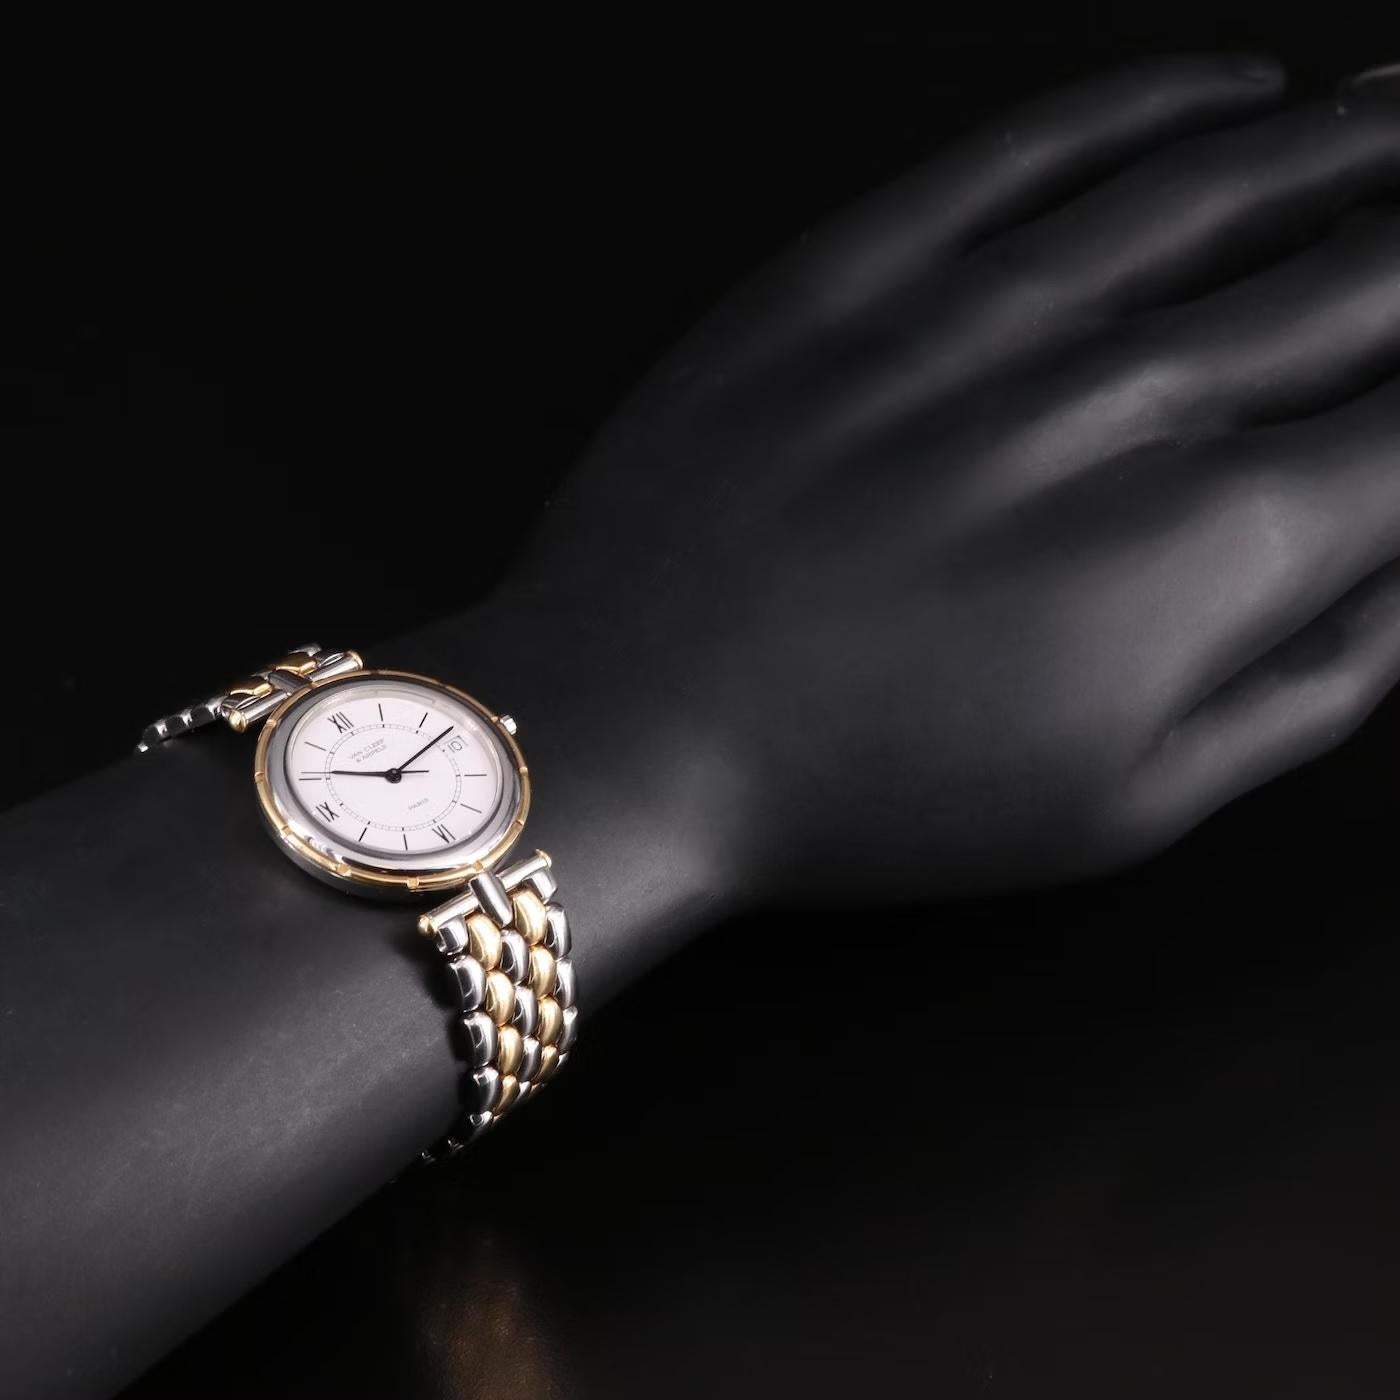 - Top quality Authentic Van Cleef & Arpels watch

- Offered in top quality used status, was used as floor model and looks like new, comes with our store tags and ant-tampering tags 

Watch Details
Brand:	Van Cleef and Arpels
Type:	Wristwatch
Model